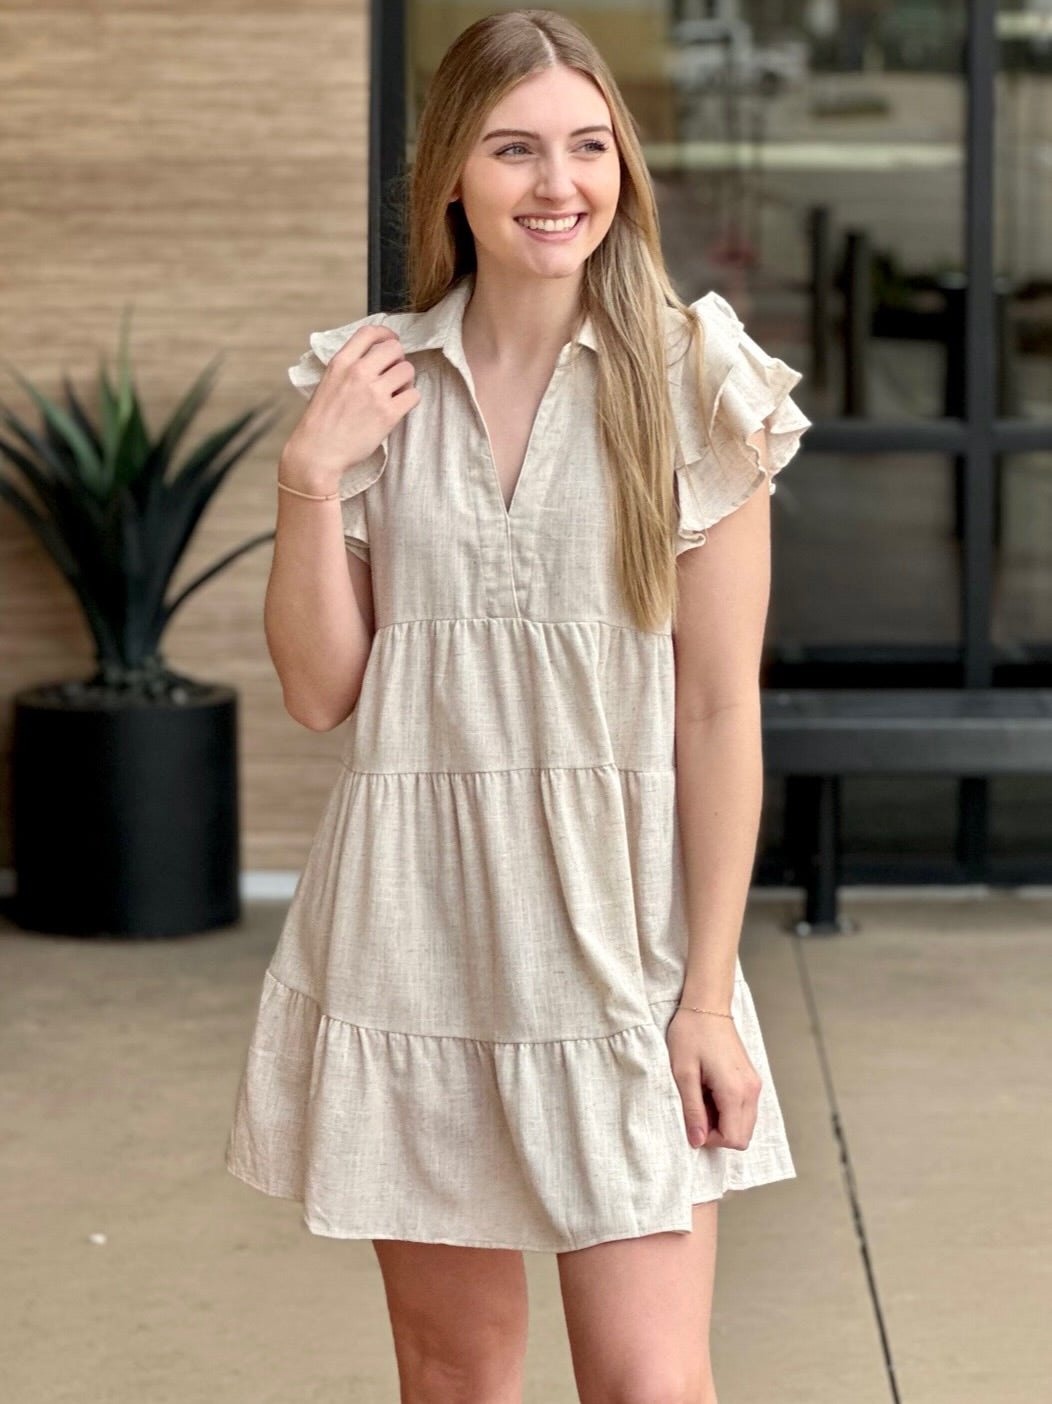 Lexi in oatmeal dress hand on shoulder